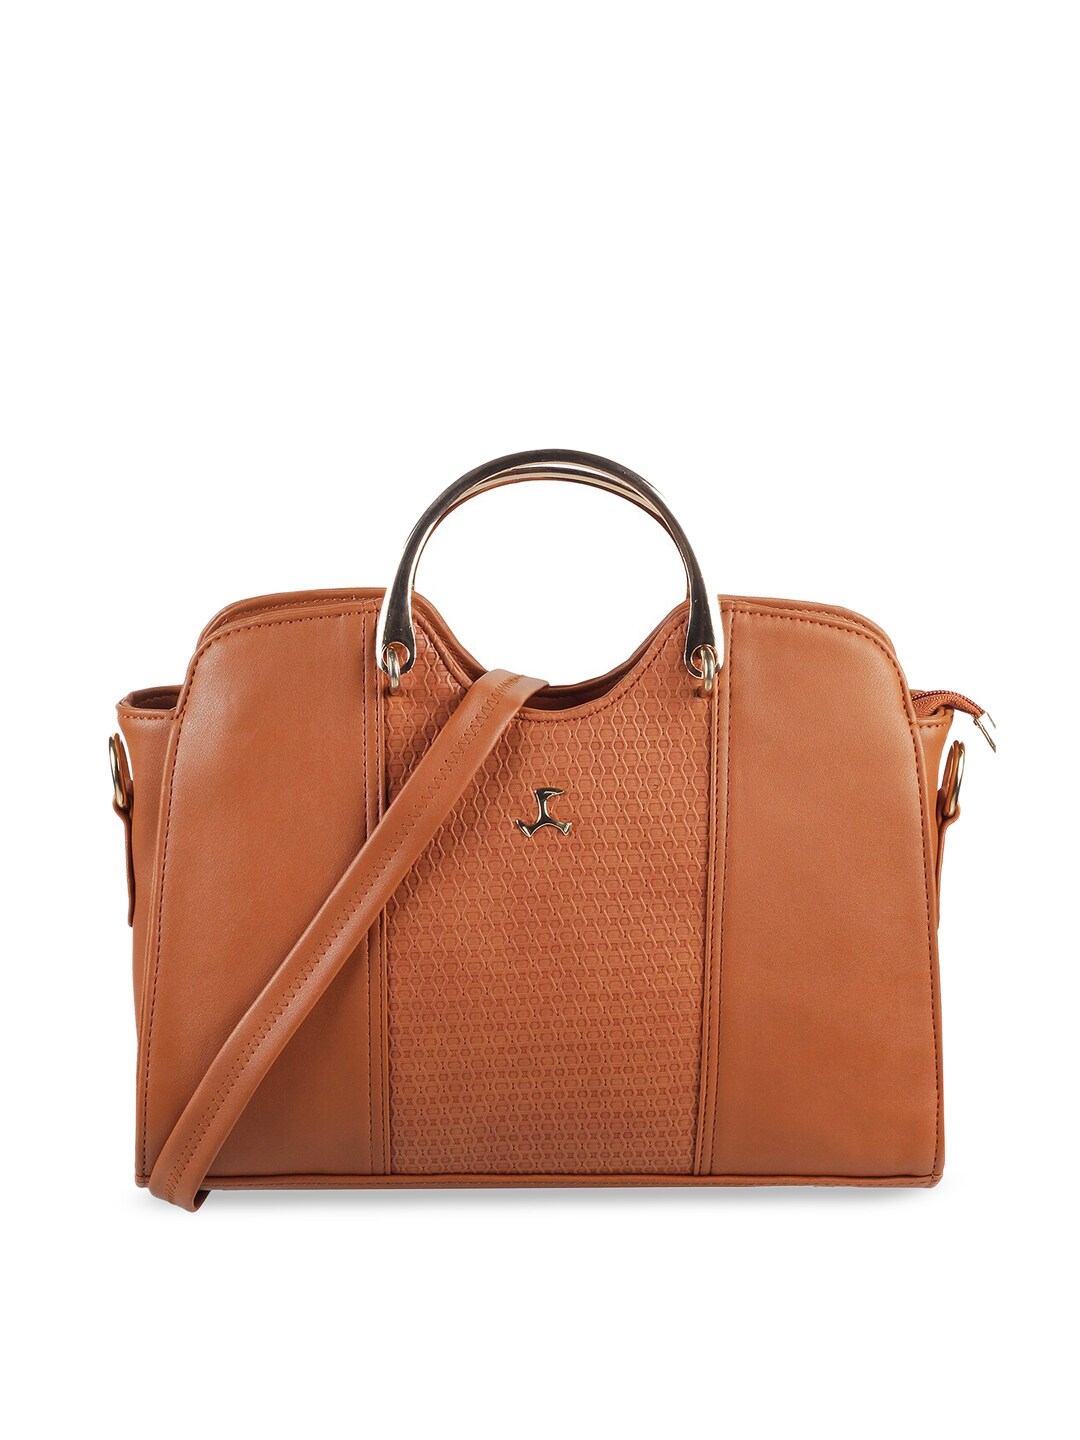 Mochi Tan Textured Swagger Handheld Bag With Sling Strap Price in India